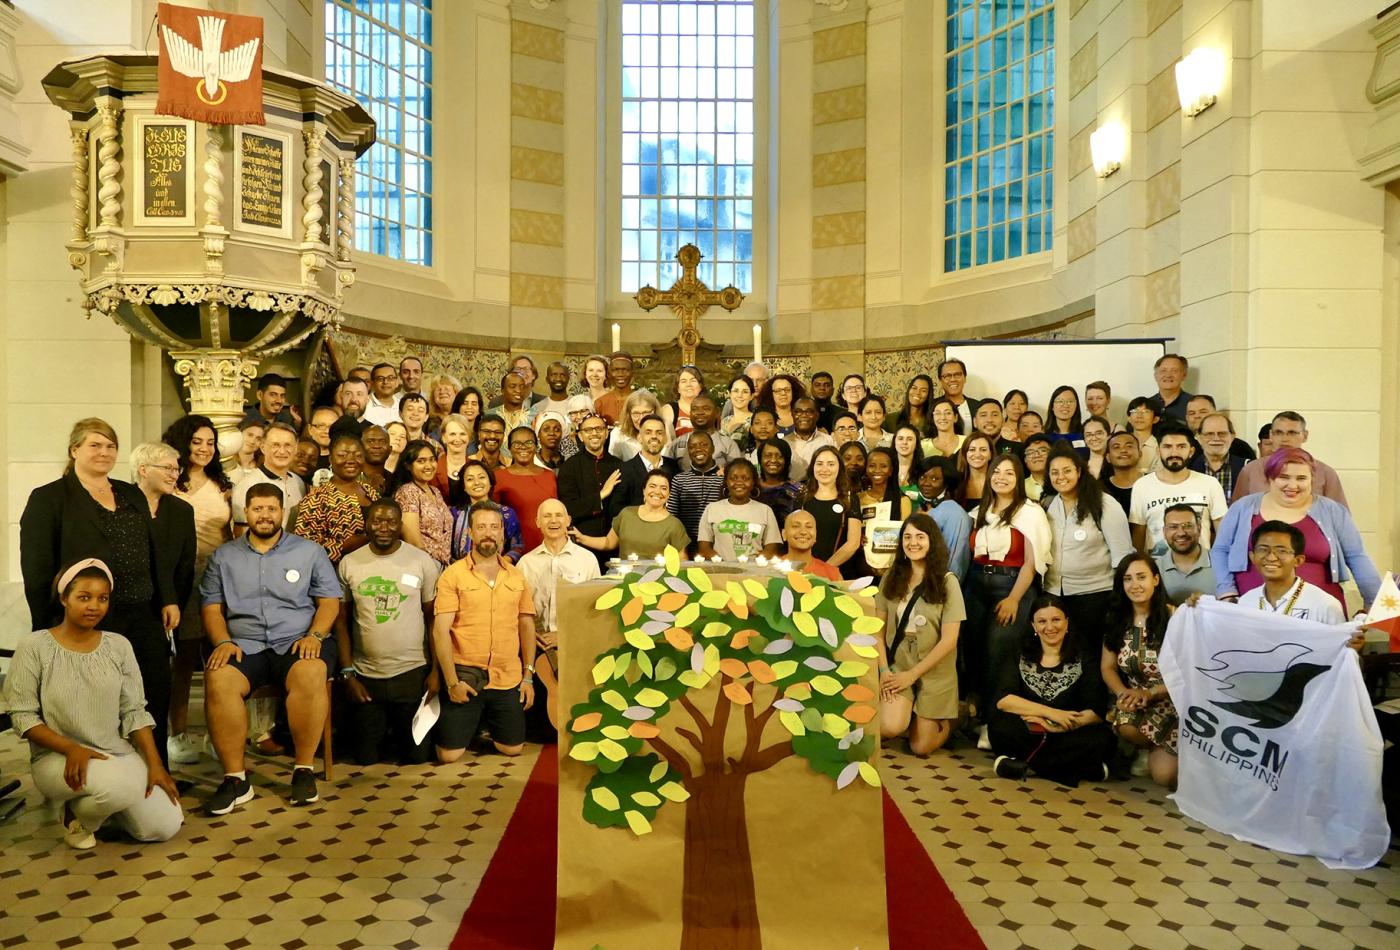 Young people, group photo, 37th Word Student Christian Federation  (WSCF) General Assembly 